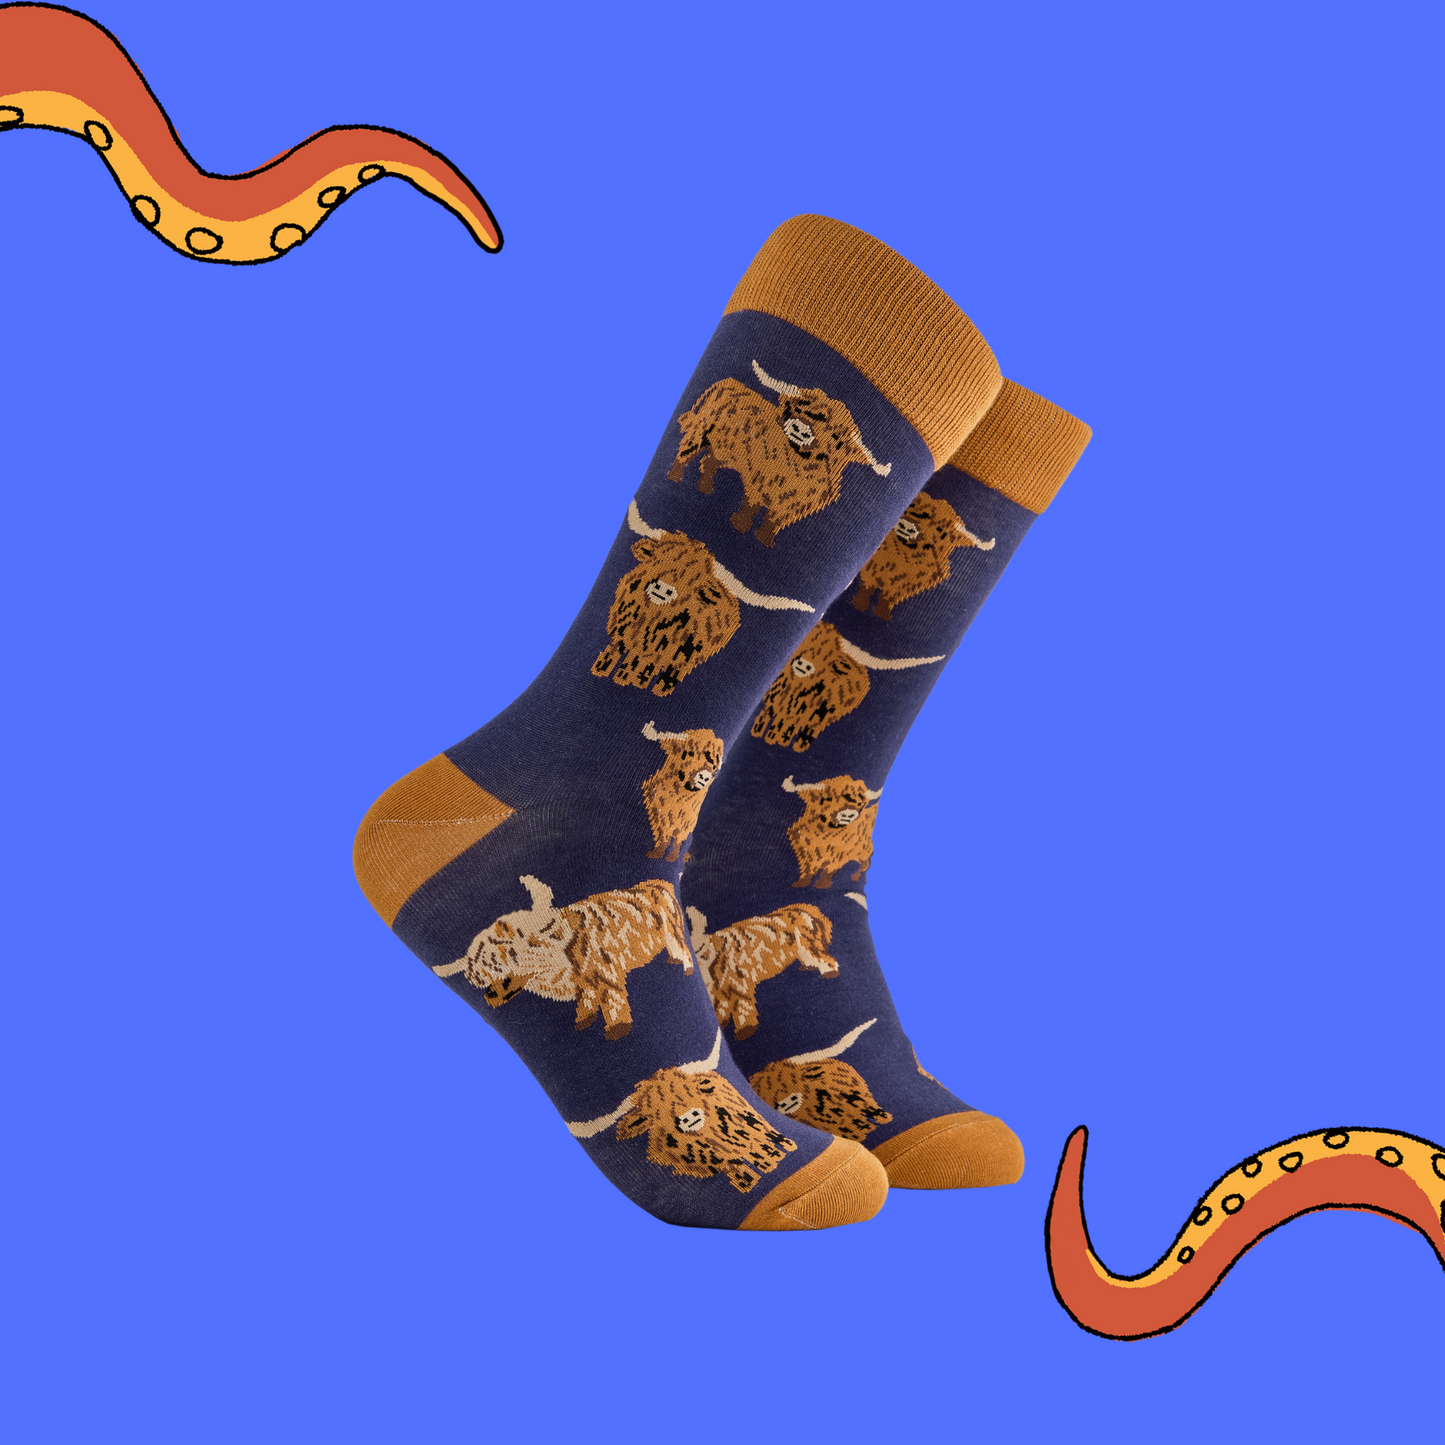 A pair of socks depicting highland cows. Blue legs, brown cuff, heel and toe.